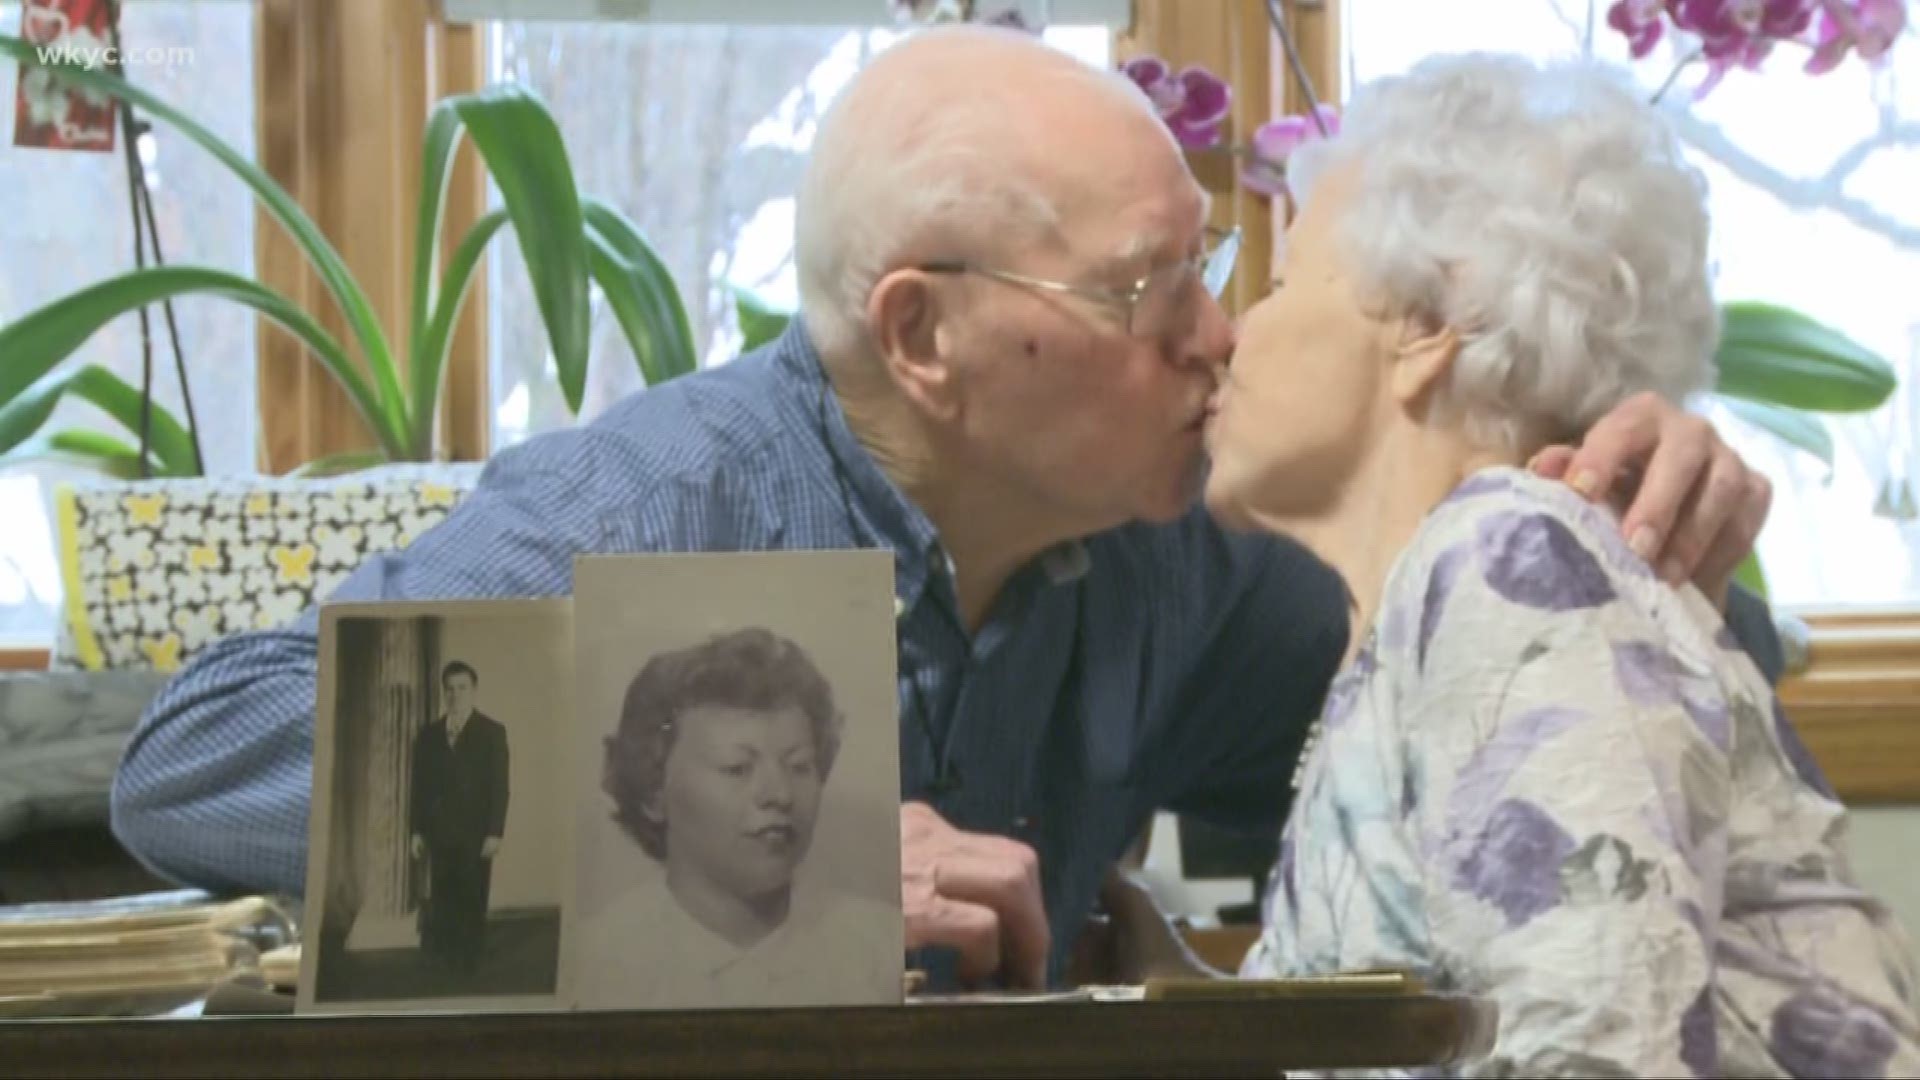 March 26, 2019: John and Ivnell Duncan have grown up and grown old together. The two met when they were just little kids in Kentucky. Now, they have been married for 70 years.